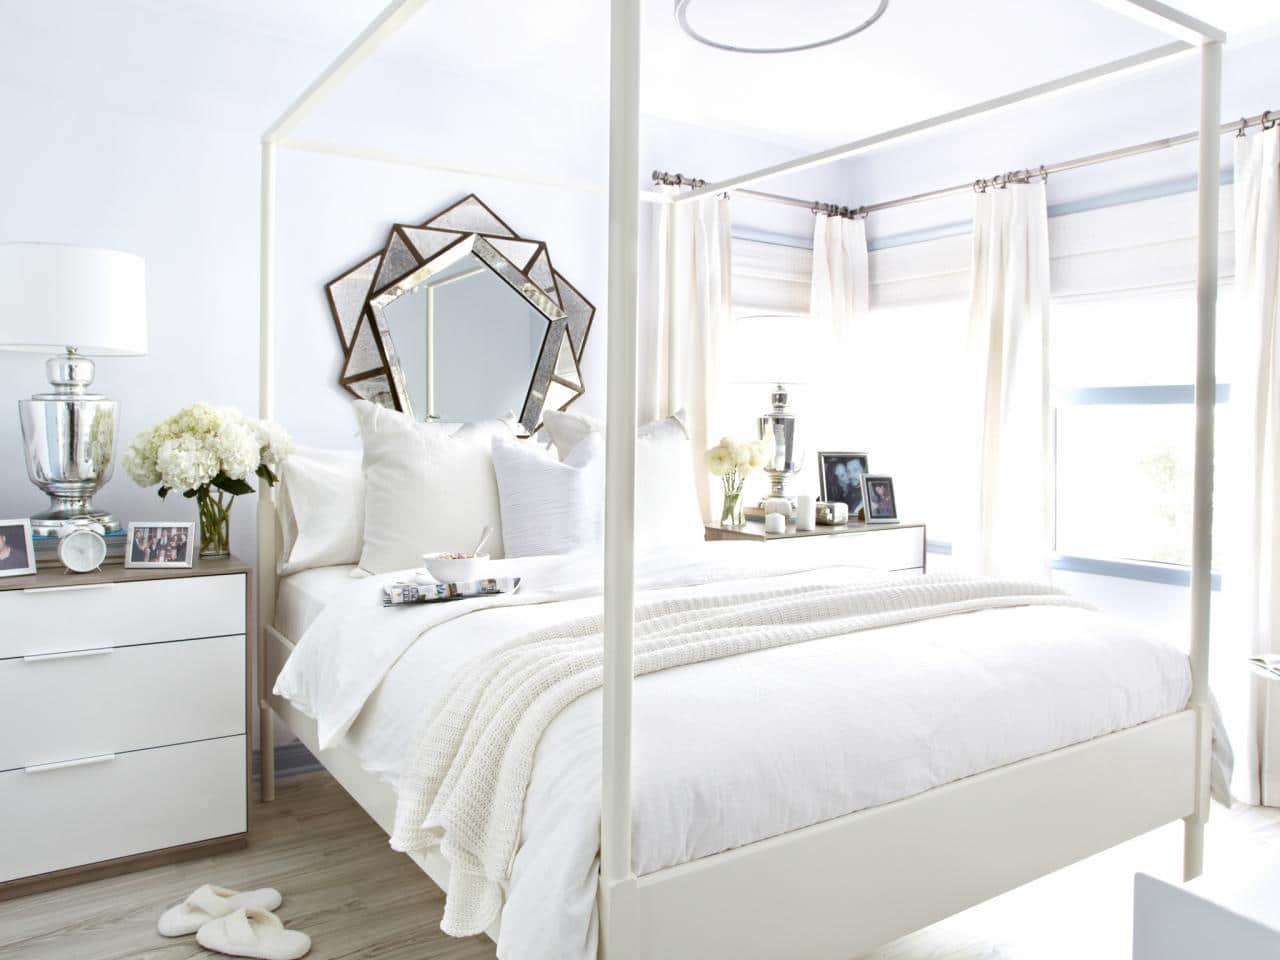 All white rooms bring simplicity to an otherwise crazy life